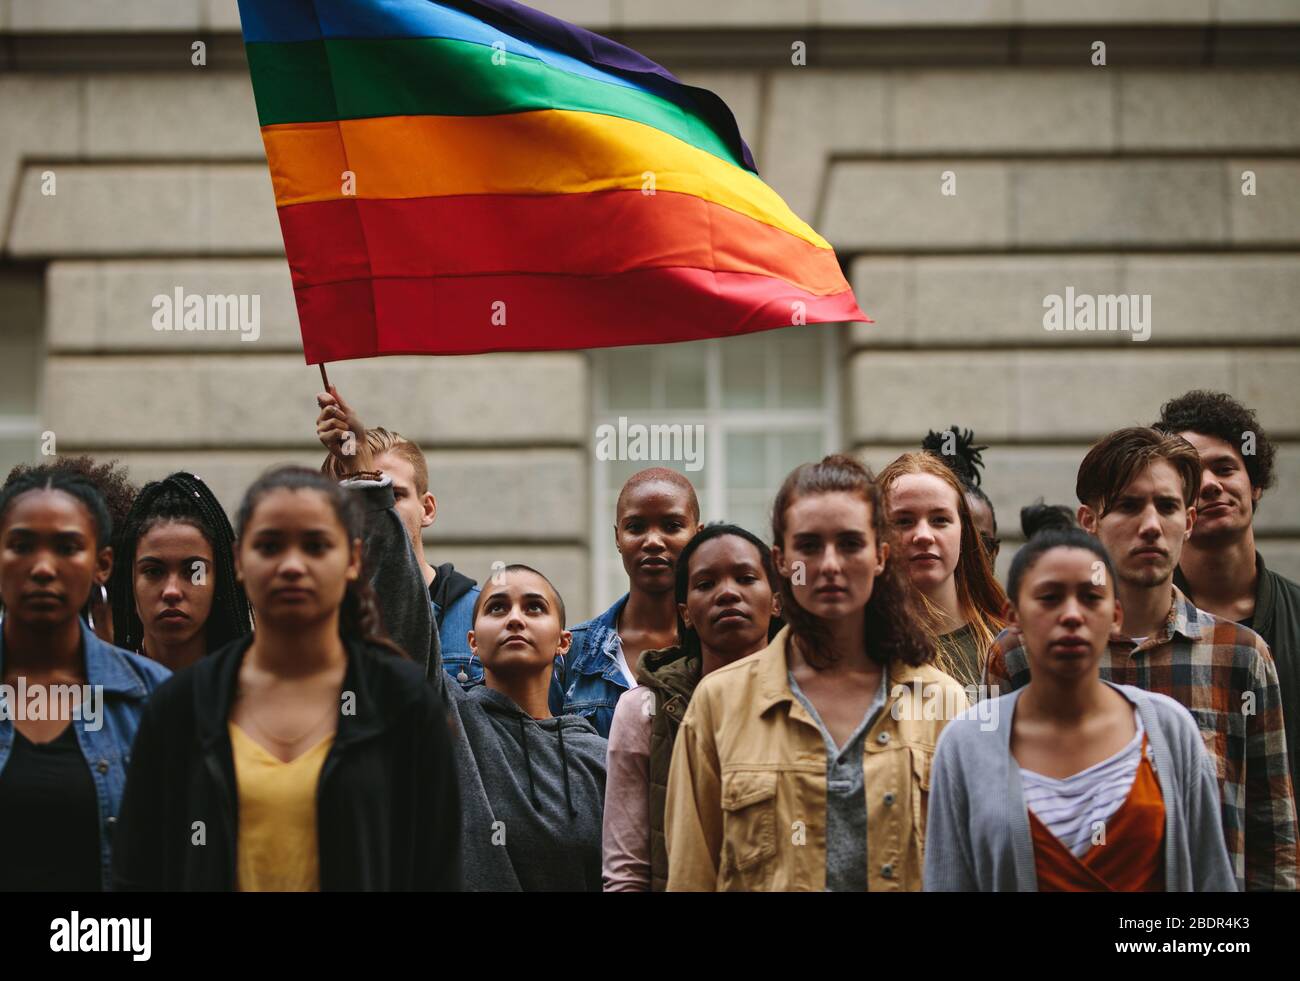 People participate in the pride parade. Multi-ethnic people in the city street with a woman waving gay rainbow flag. Stock Photo